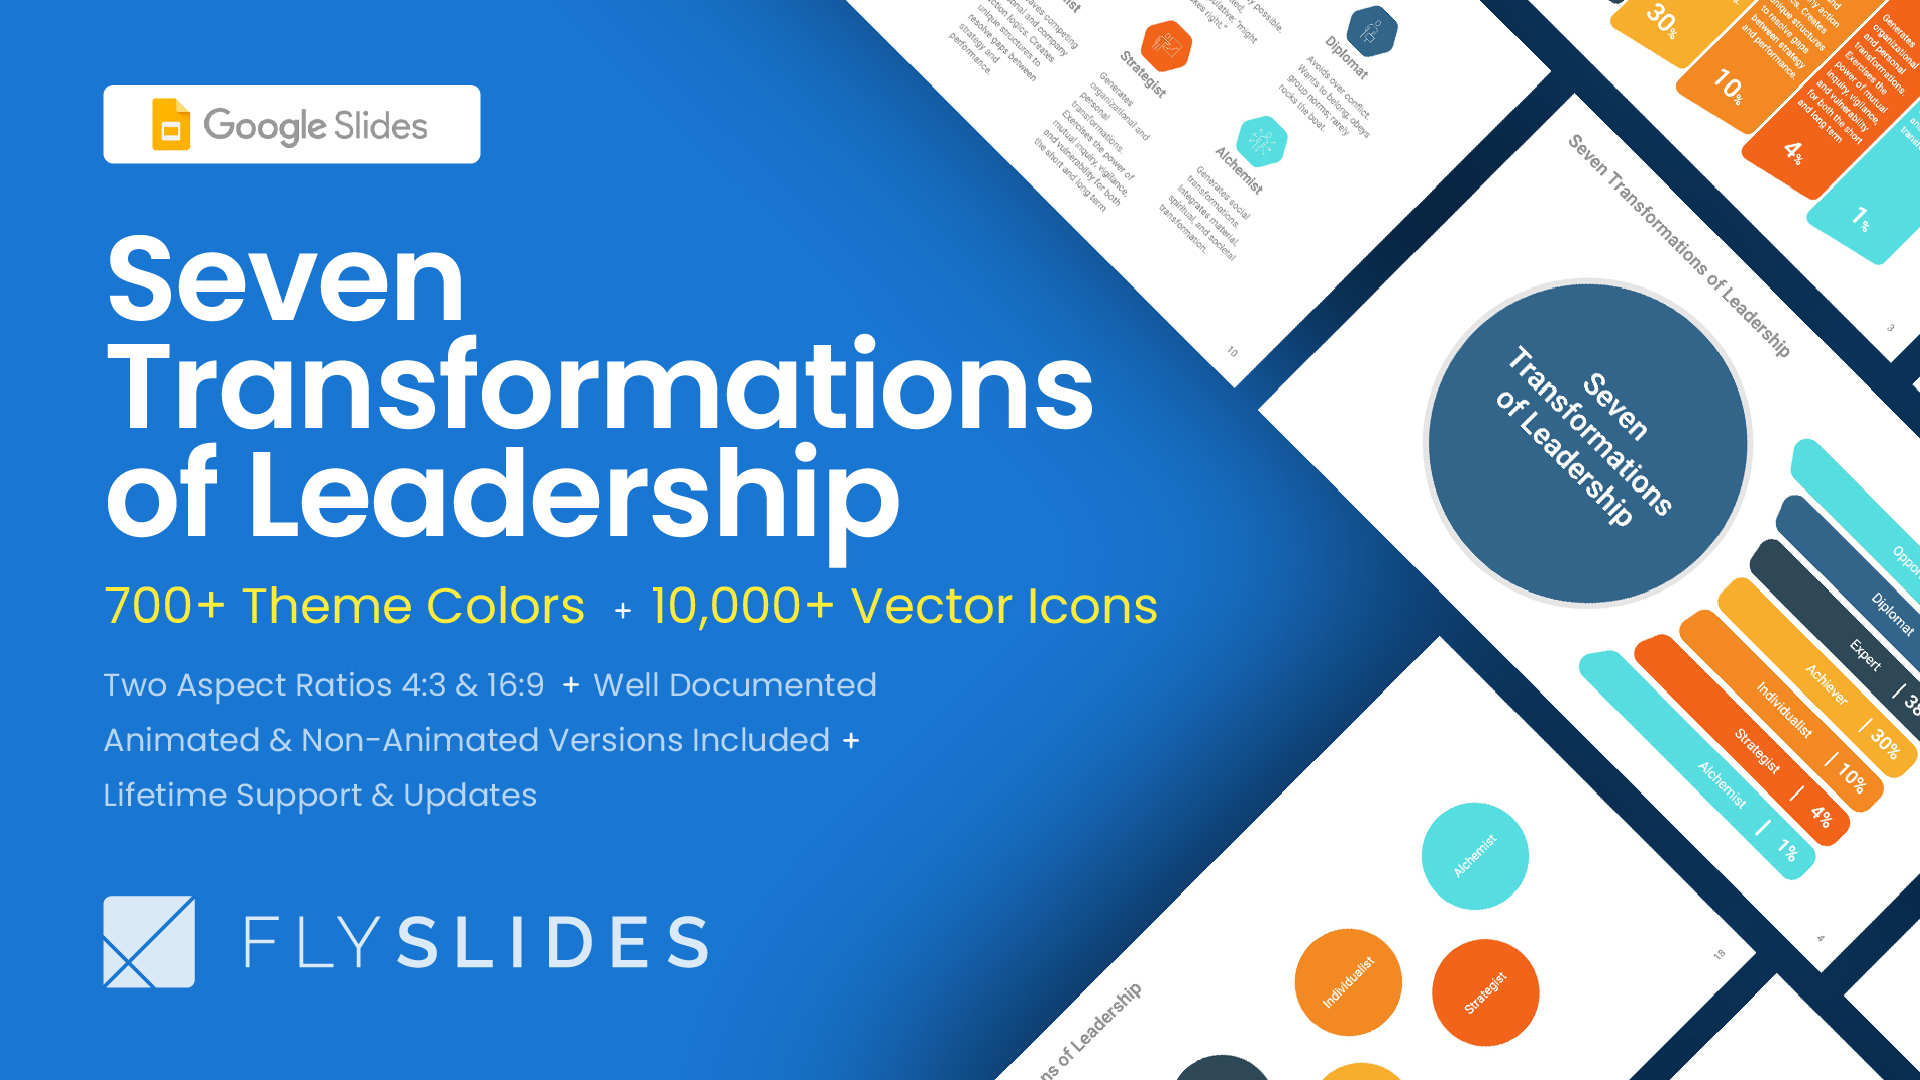 Best Seven Transformations of Leadership Google Slides Themes and Templates for Presentation